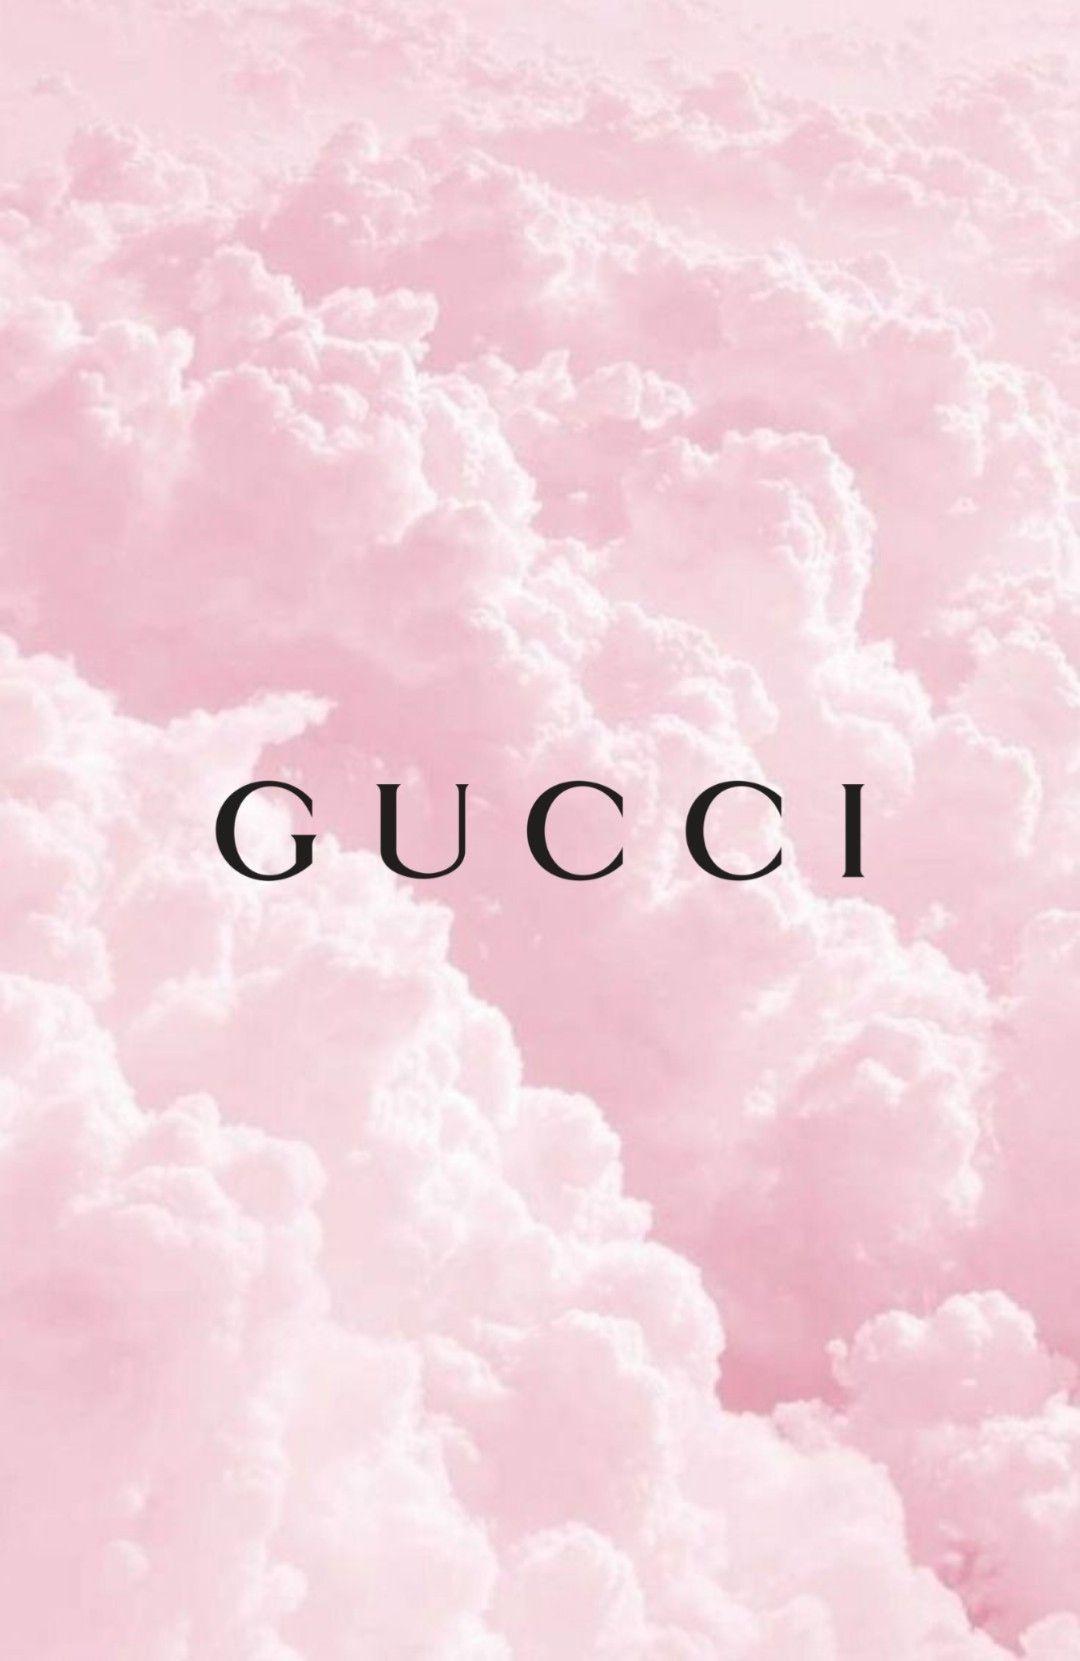 Gucci Girly Wallpapers - Free Gucci Girly Backgrounds -